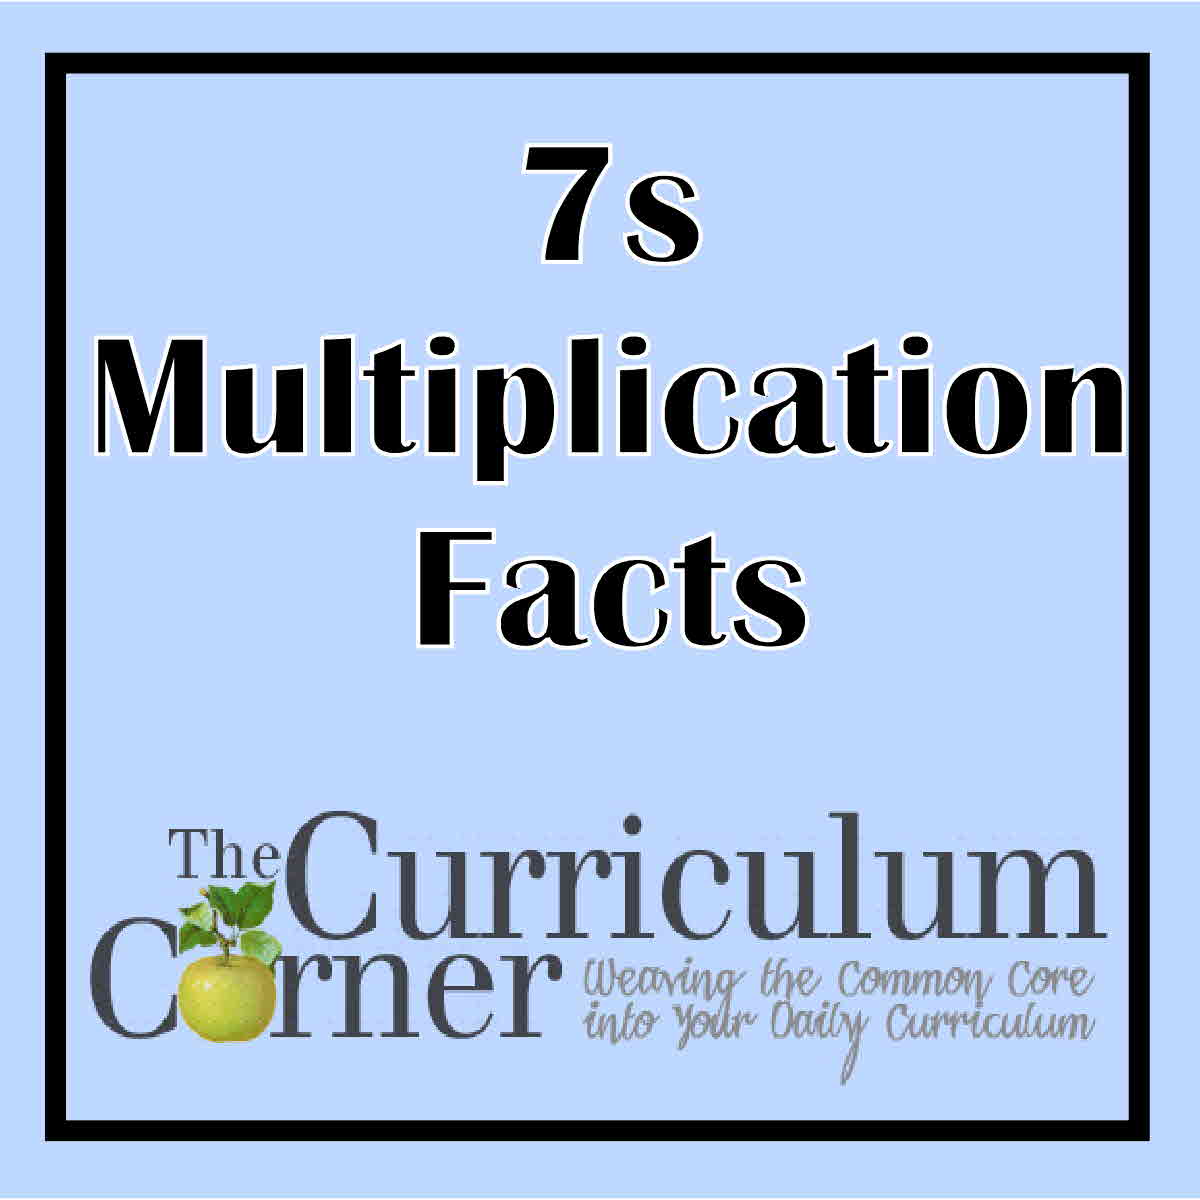 7s-multiplication-facts